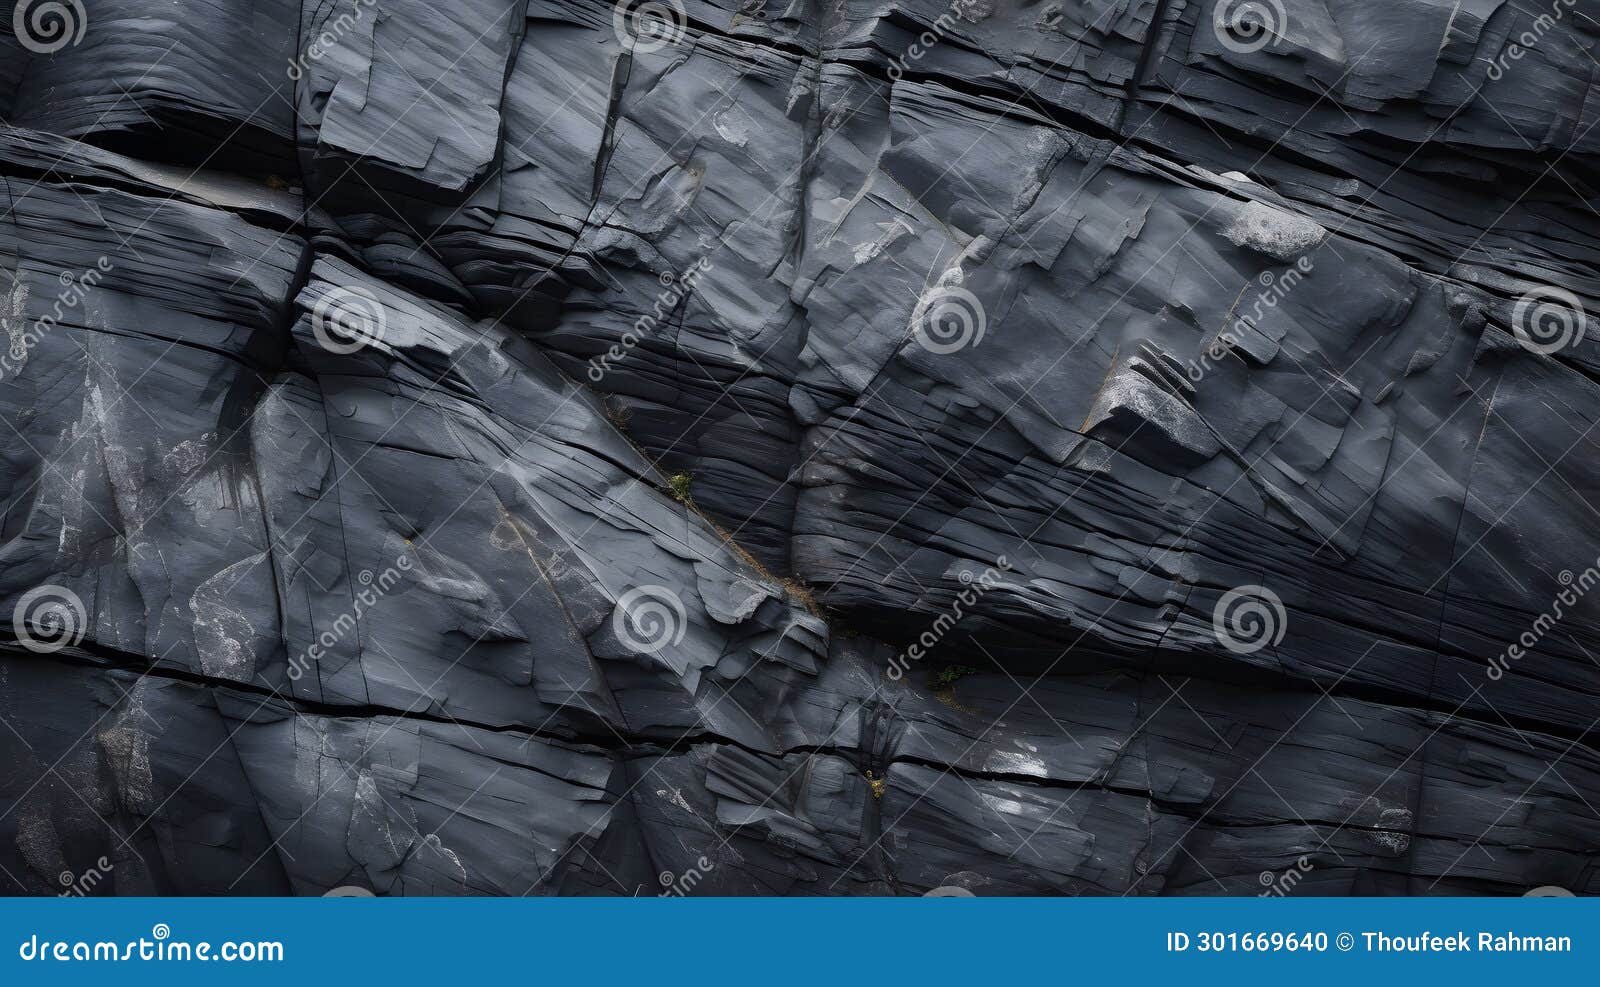 dark mountain texture with huge cracks and layers.